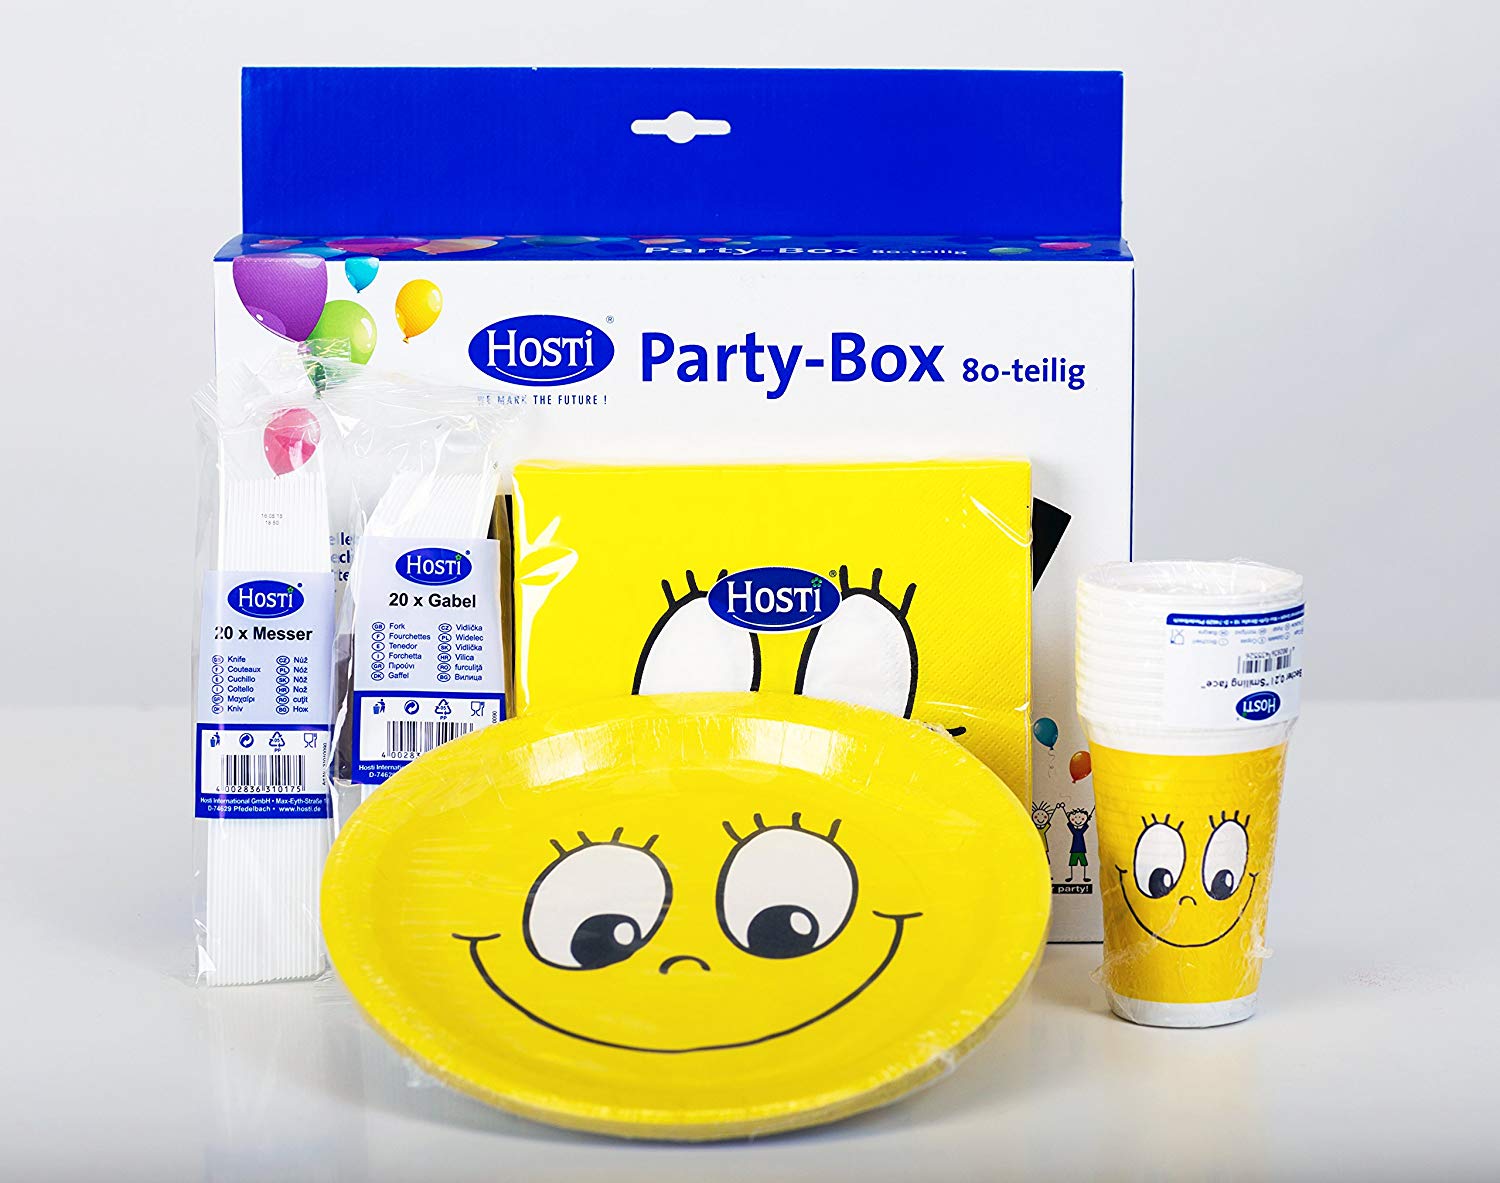 Partybox "Smile"